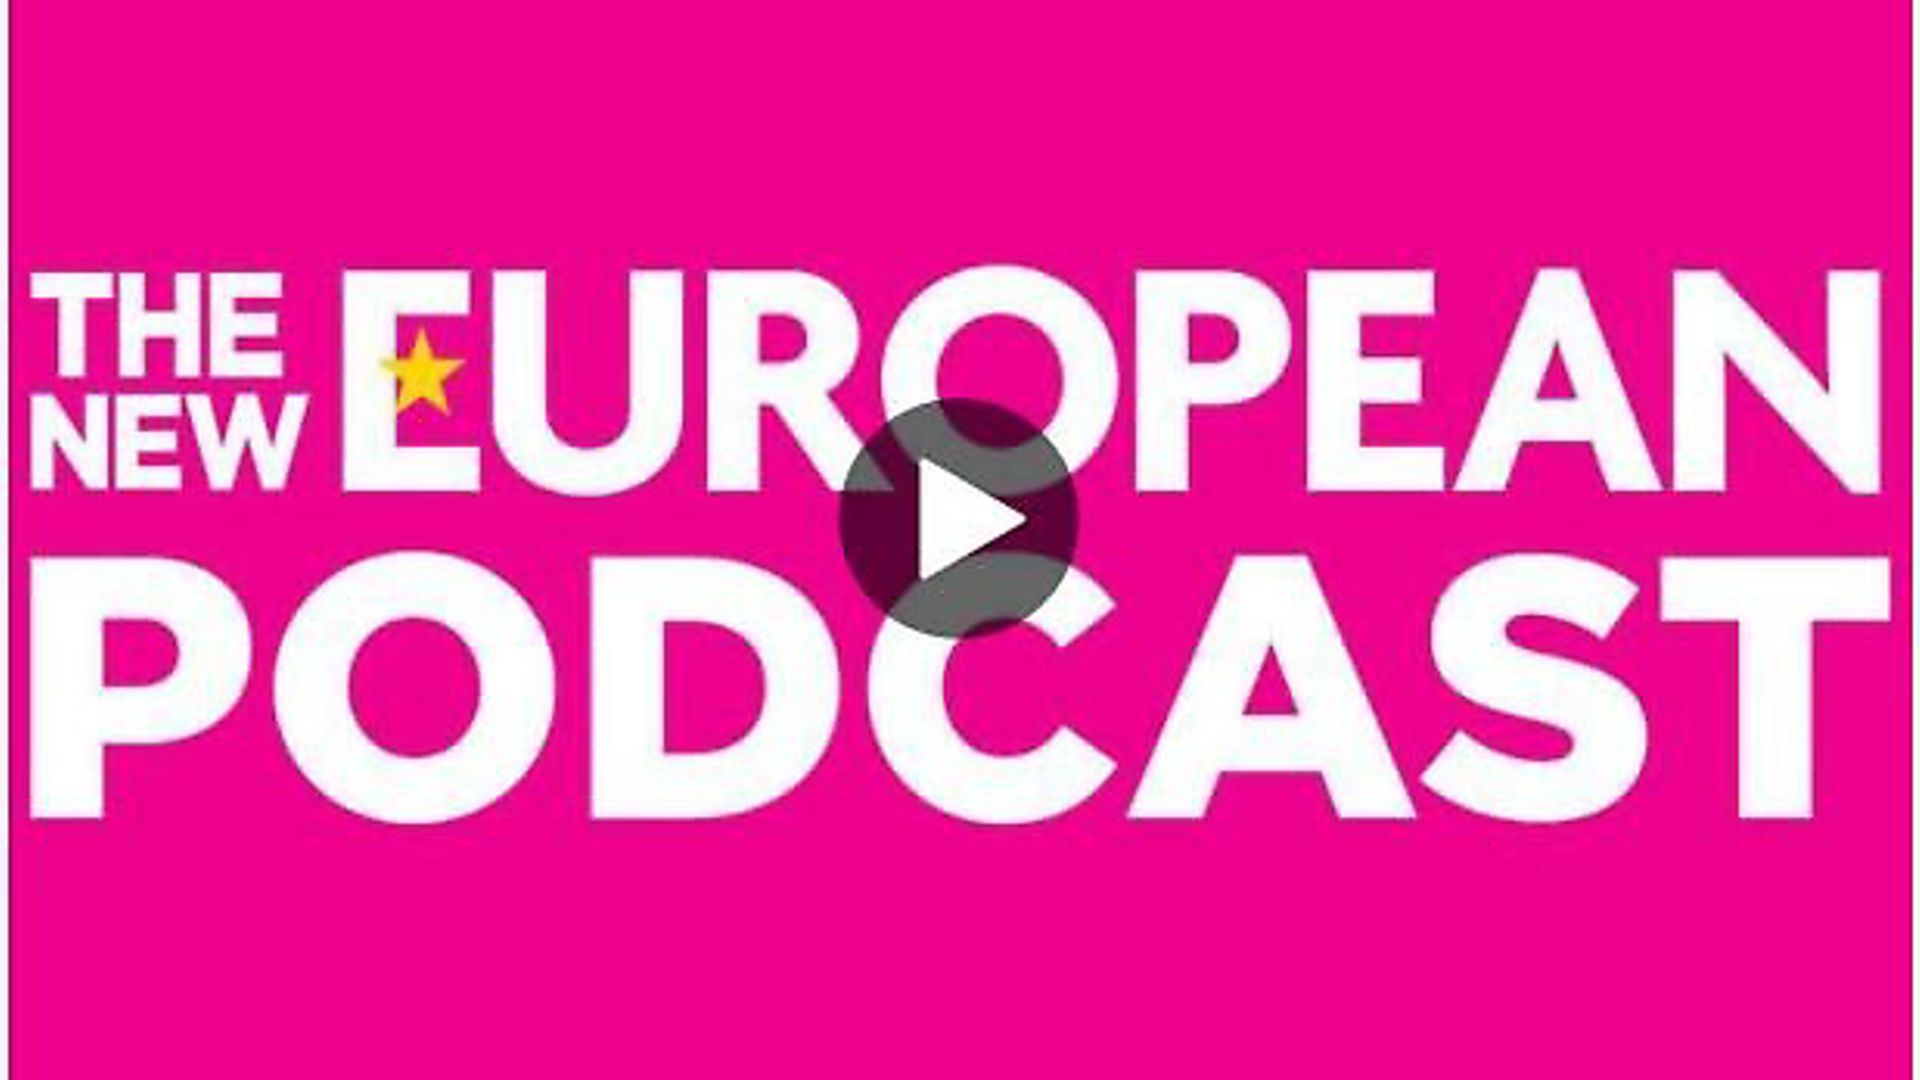 Then New European podcast Episode 2 is out now. - Credit: Archant